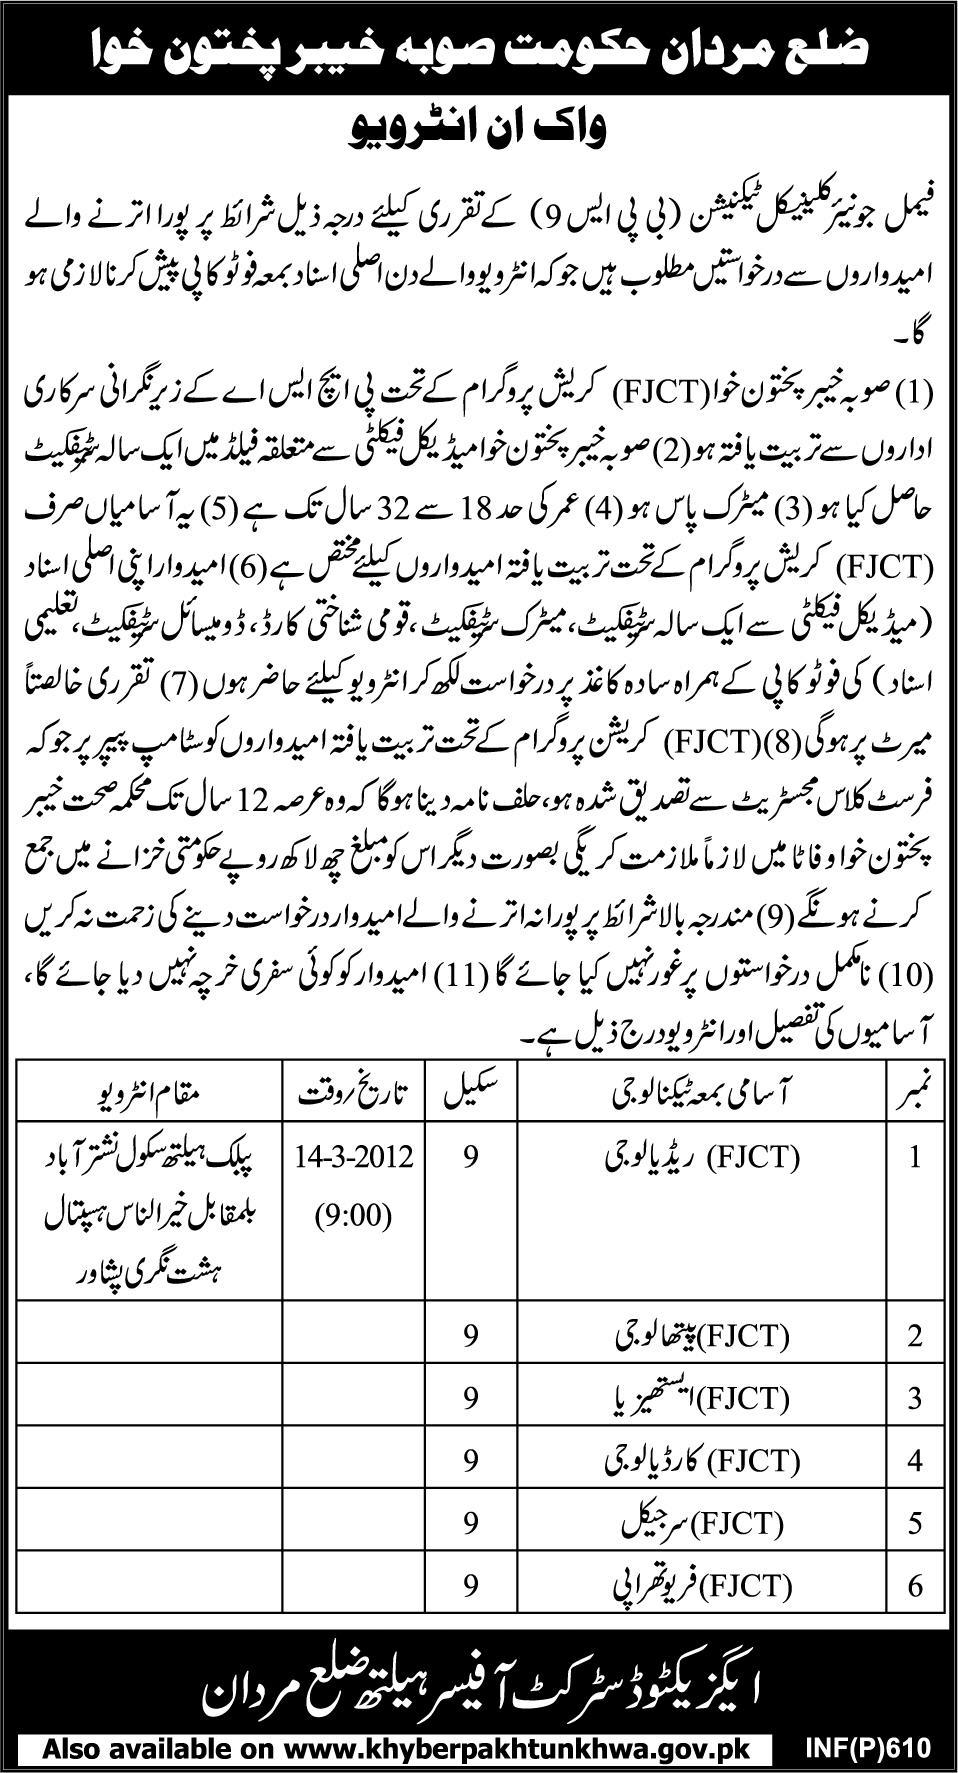 Junior Clinical Technician Required by District Mardan, Government of KPK